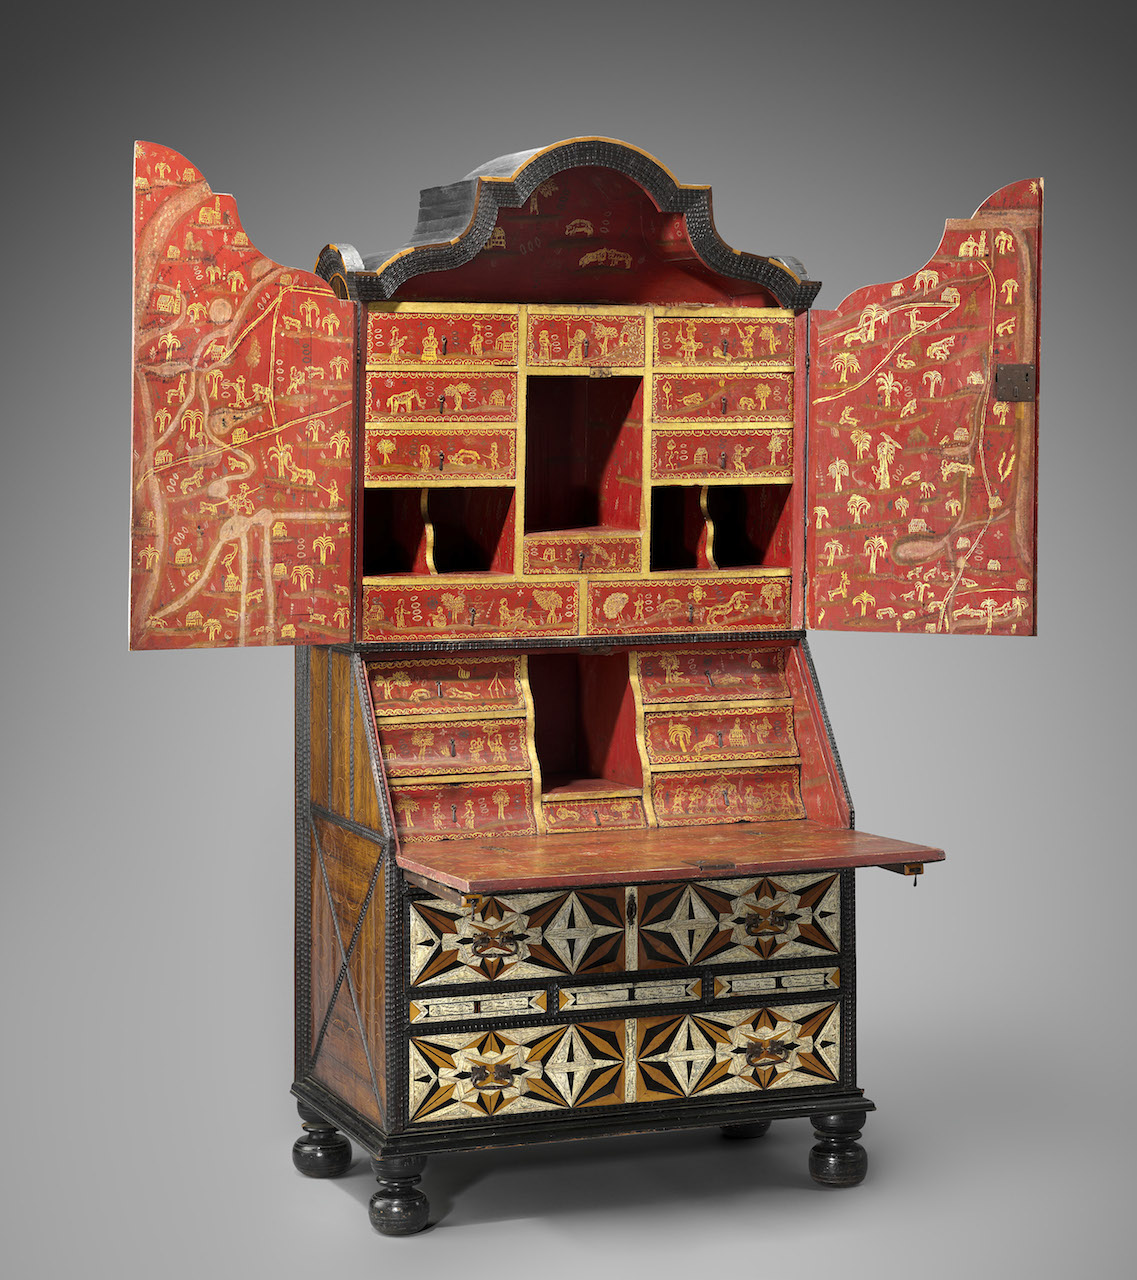 Desk and bookcase (mid-18th century), inlaid woods and incised and painted bone, maque, gold and polychrome paint, metal hardware (Ann and Gordon Getty Collection, courtesy, Museum of Fine Arts, Boston)